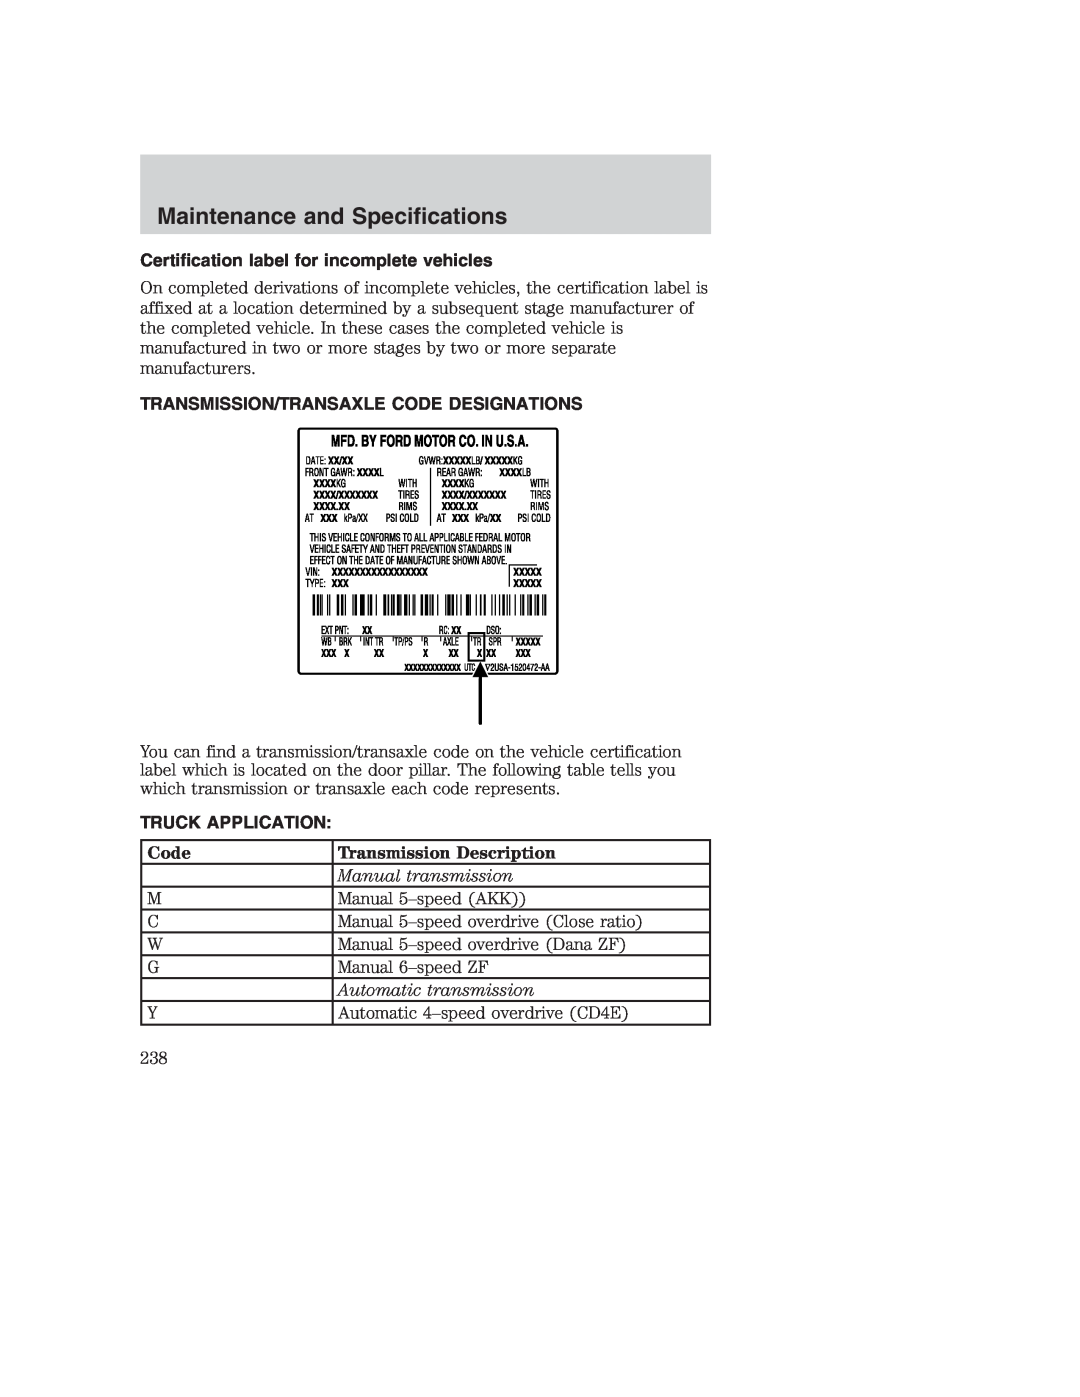 Ford AM/FM stereo Certification label for incomplete vehicles, Transmission/Transaxle Code Designations, Truck Application 